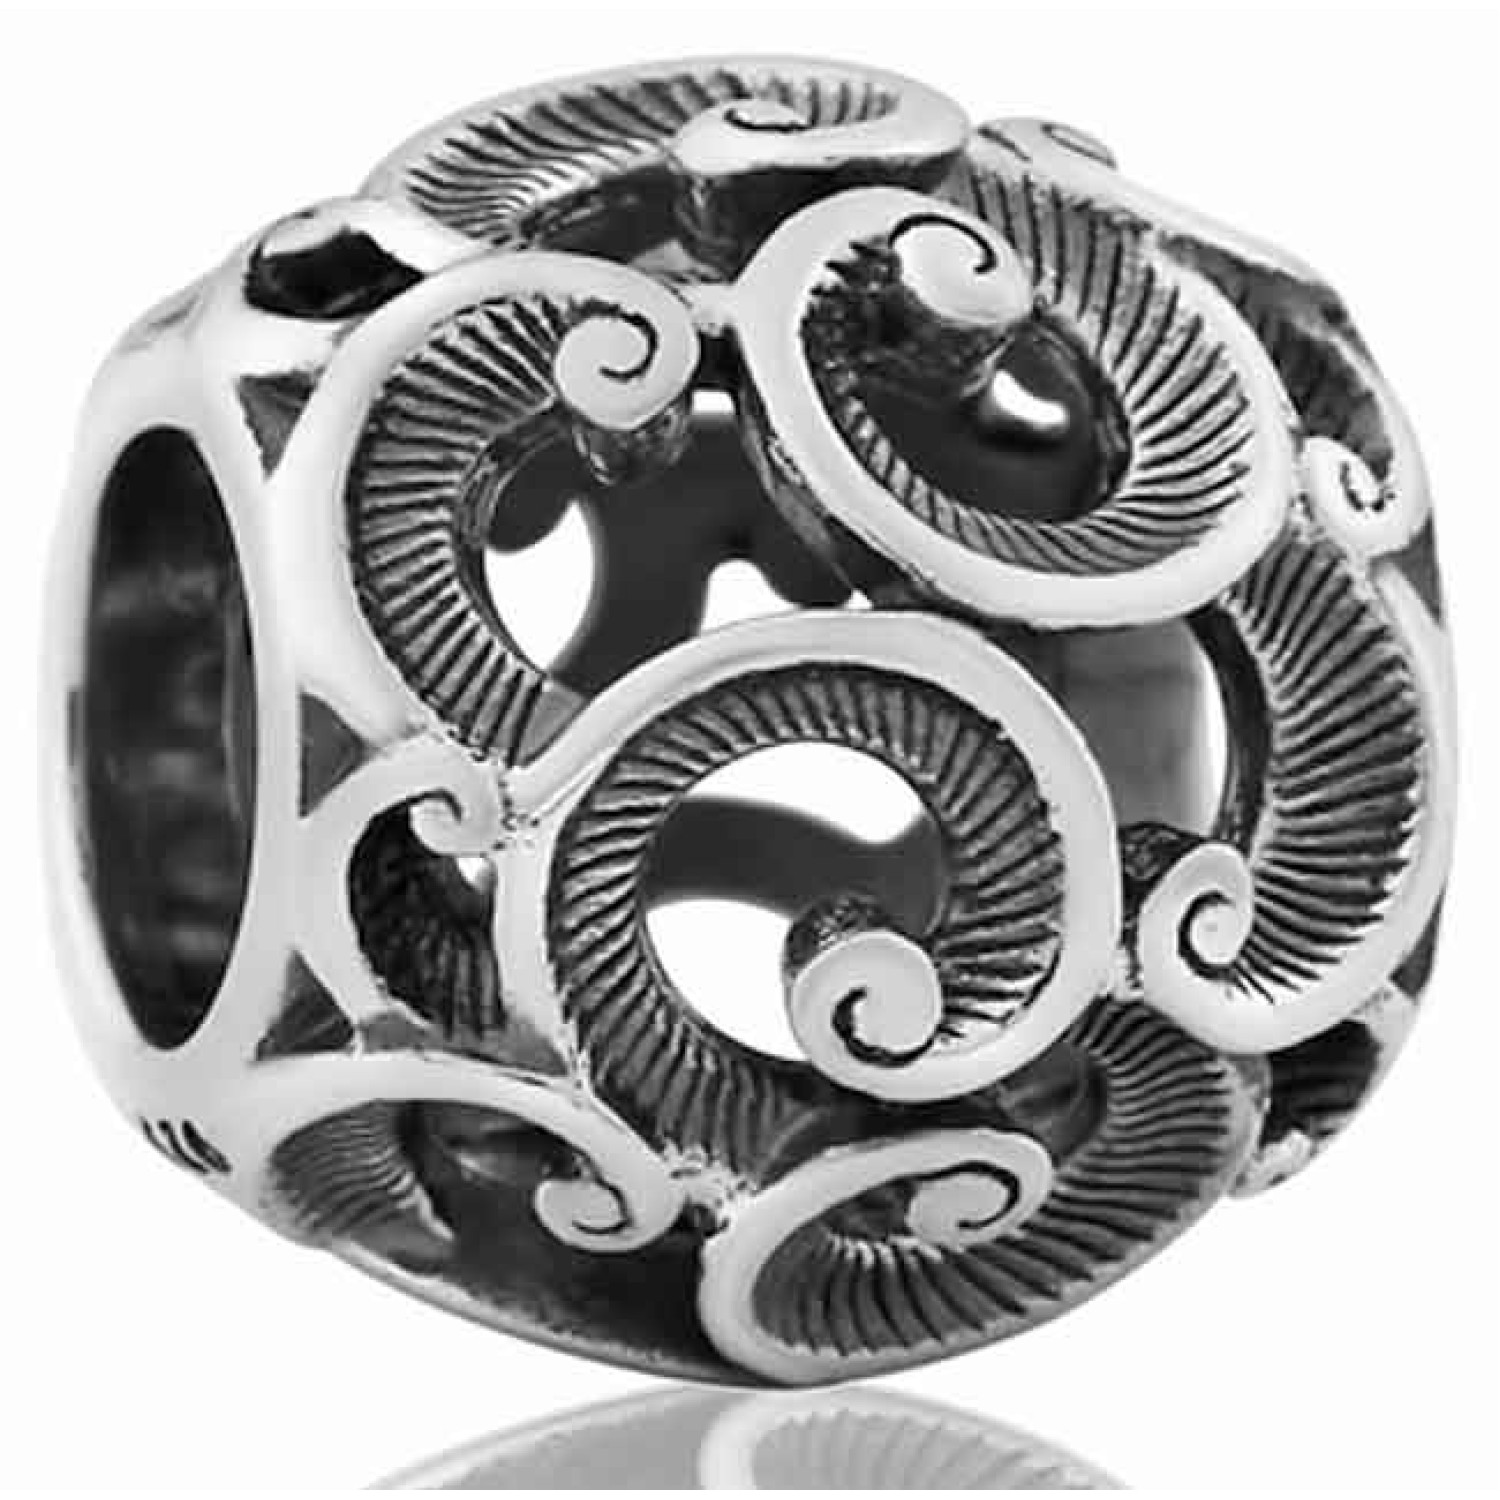 LK228 Evolve Treasured Koru Charm (Valued)). The beautiful, unfurling silver fern fronds depicted, symbolise new life, growth, strength and peace. The fronds are found in native New Zealand forests and are harvested each spring. These delicate little trea